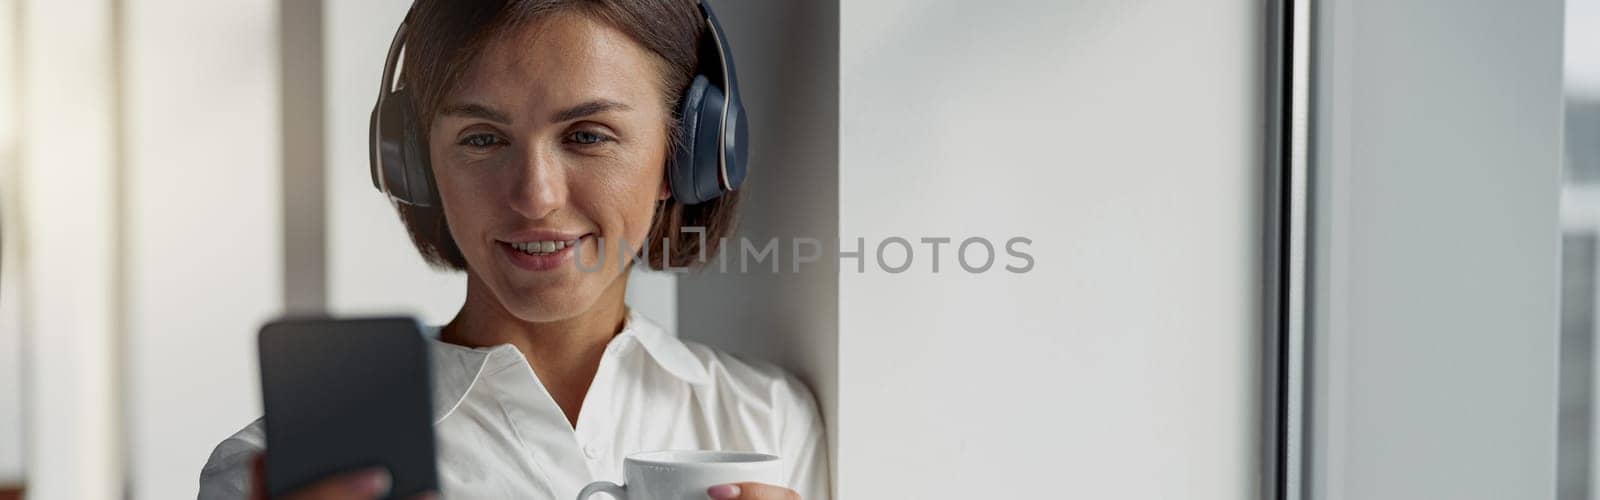 European business woman holding cup of coffee and using phone while standing near window at office